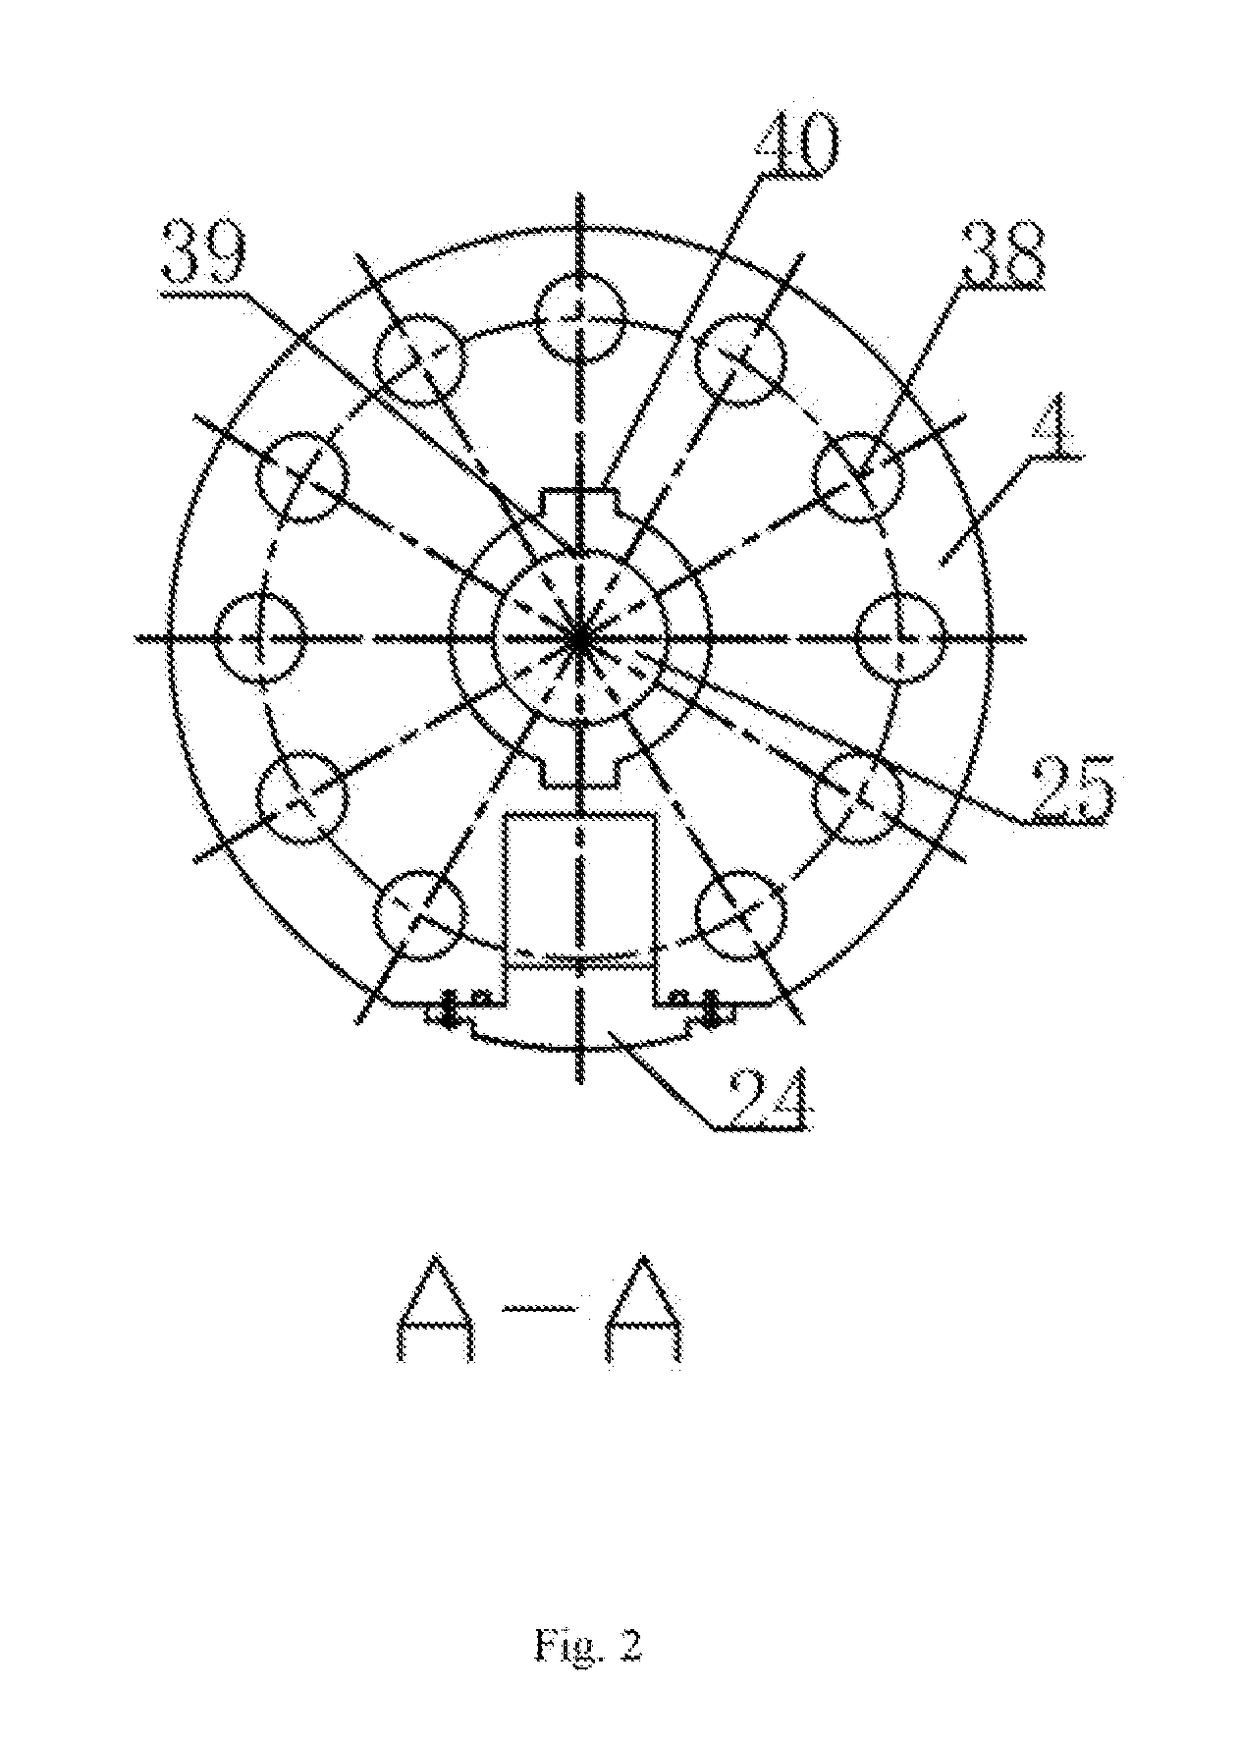 Dynamic inwardly eccentrically-placed directional drill bit type rotation guidance apparatus